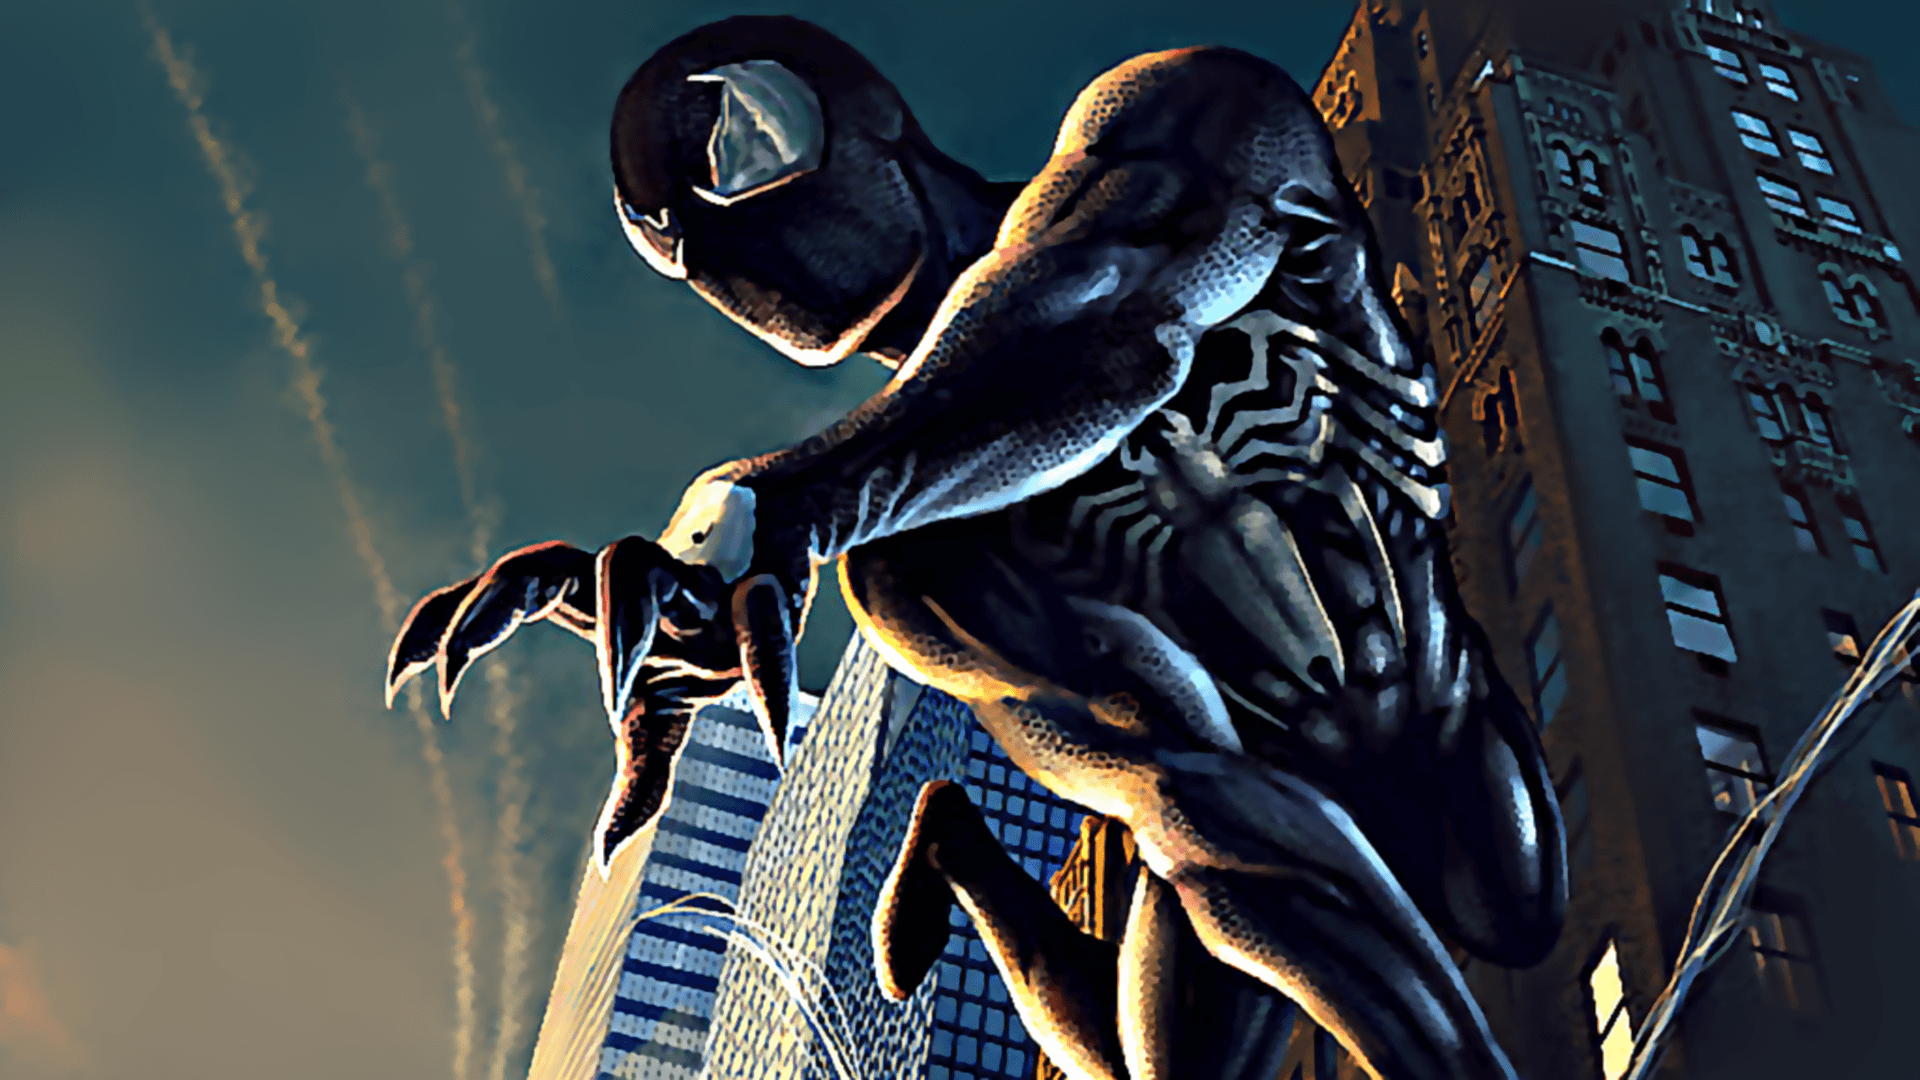 Spider-Man And Black Panther Wallpapers - Wallpaper Cave